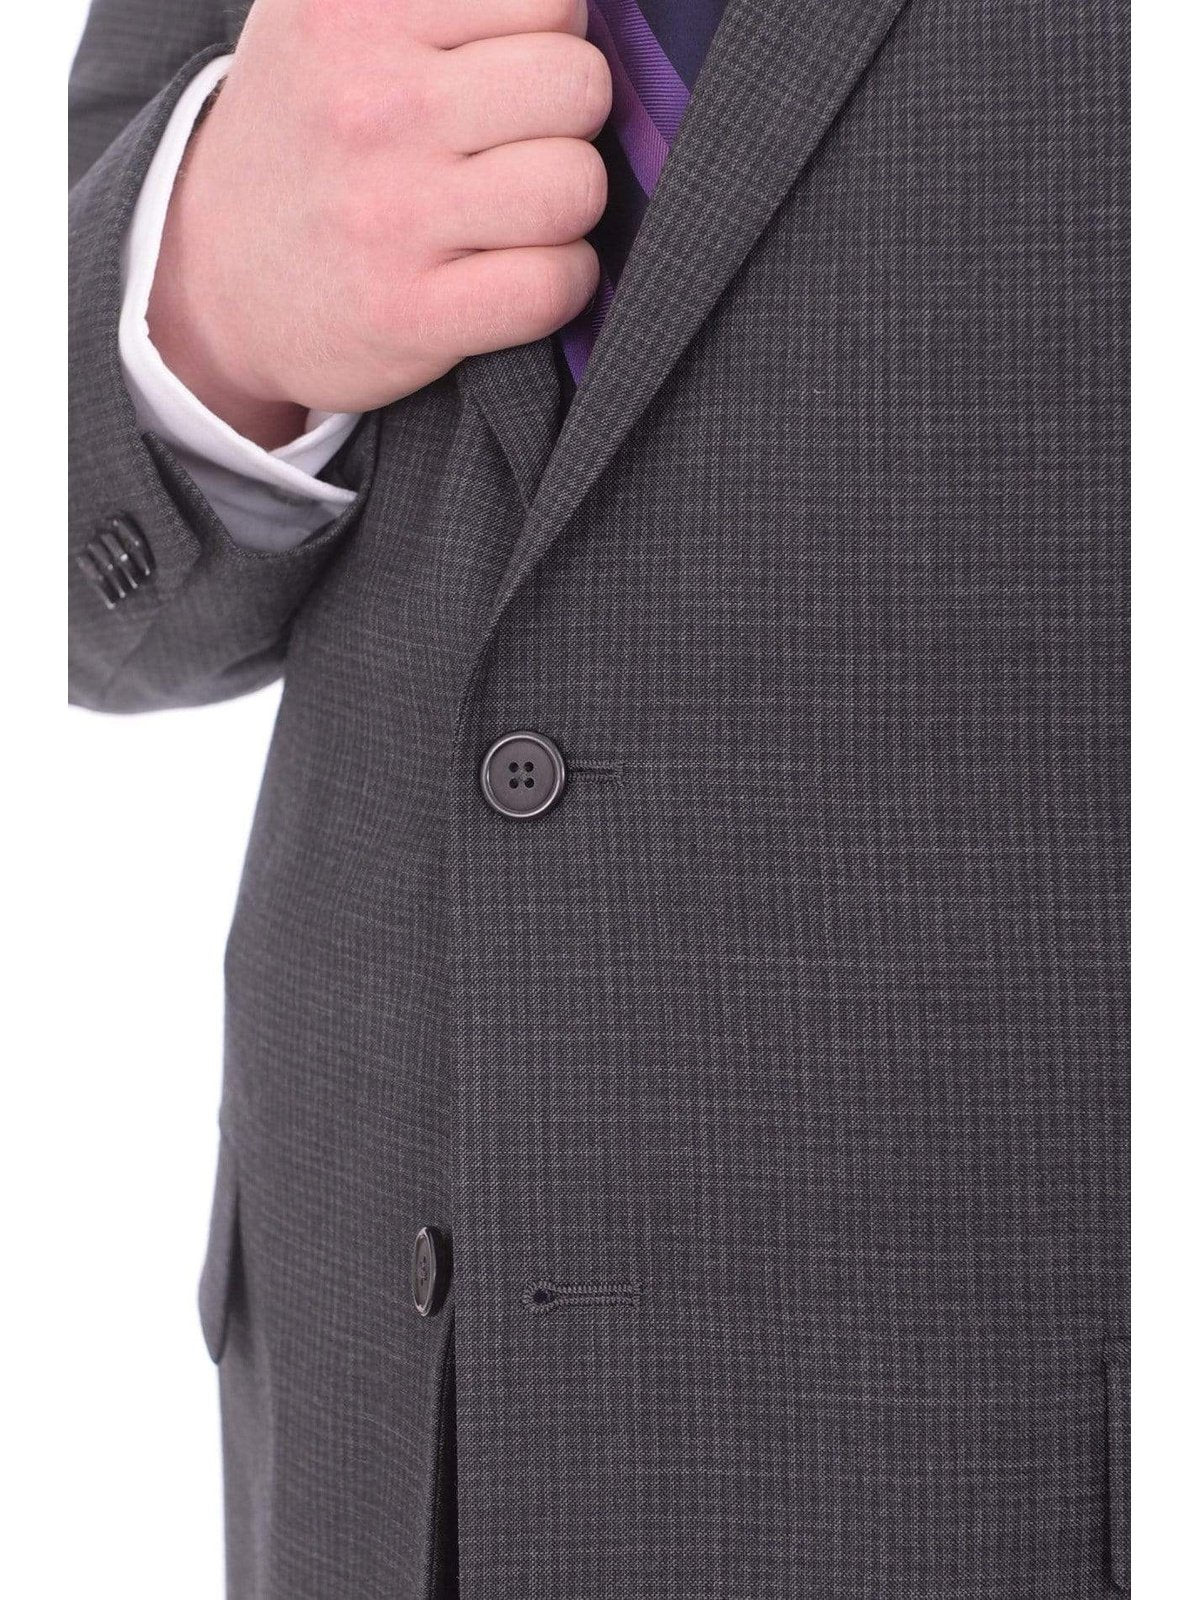 Lazetti Couture Sale Suits Lazetti Couture Portly Fit Charcoal Gray Check Two Button Wool Suit